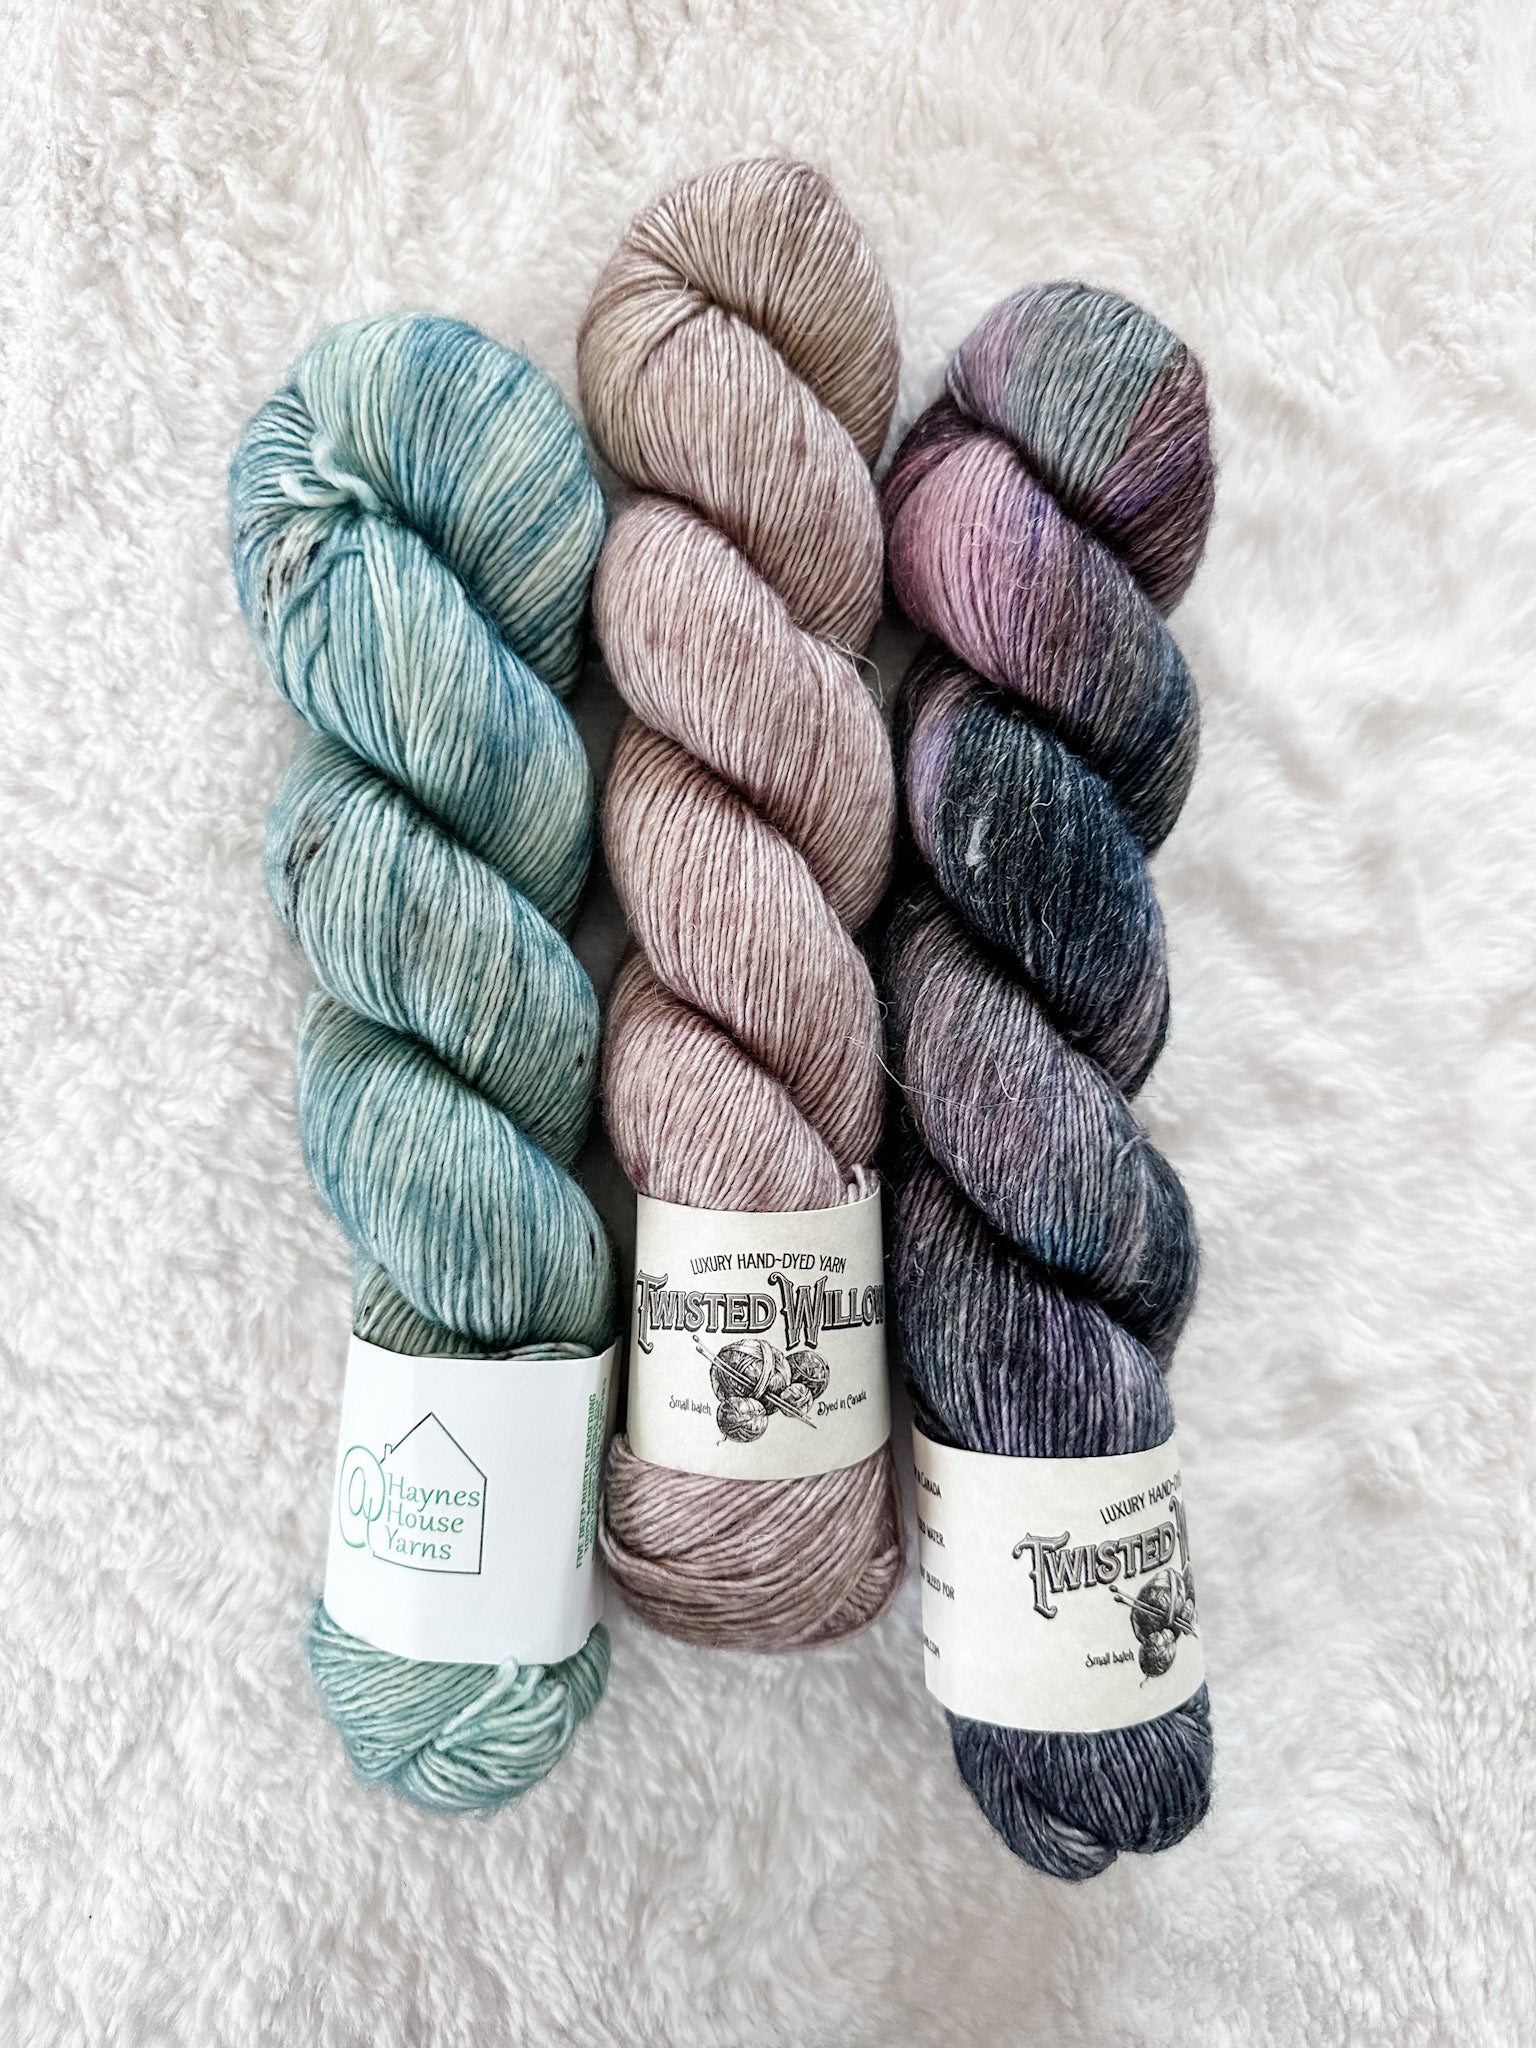 Lot 50 - Twisted Willow & Haynes House Yarns